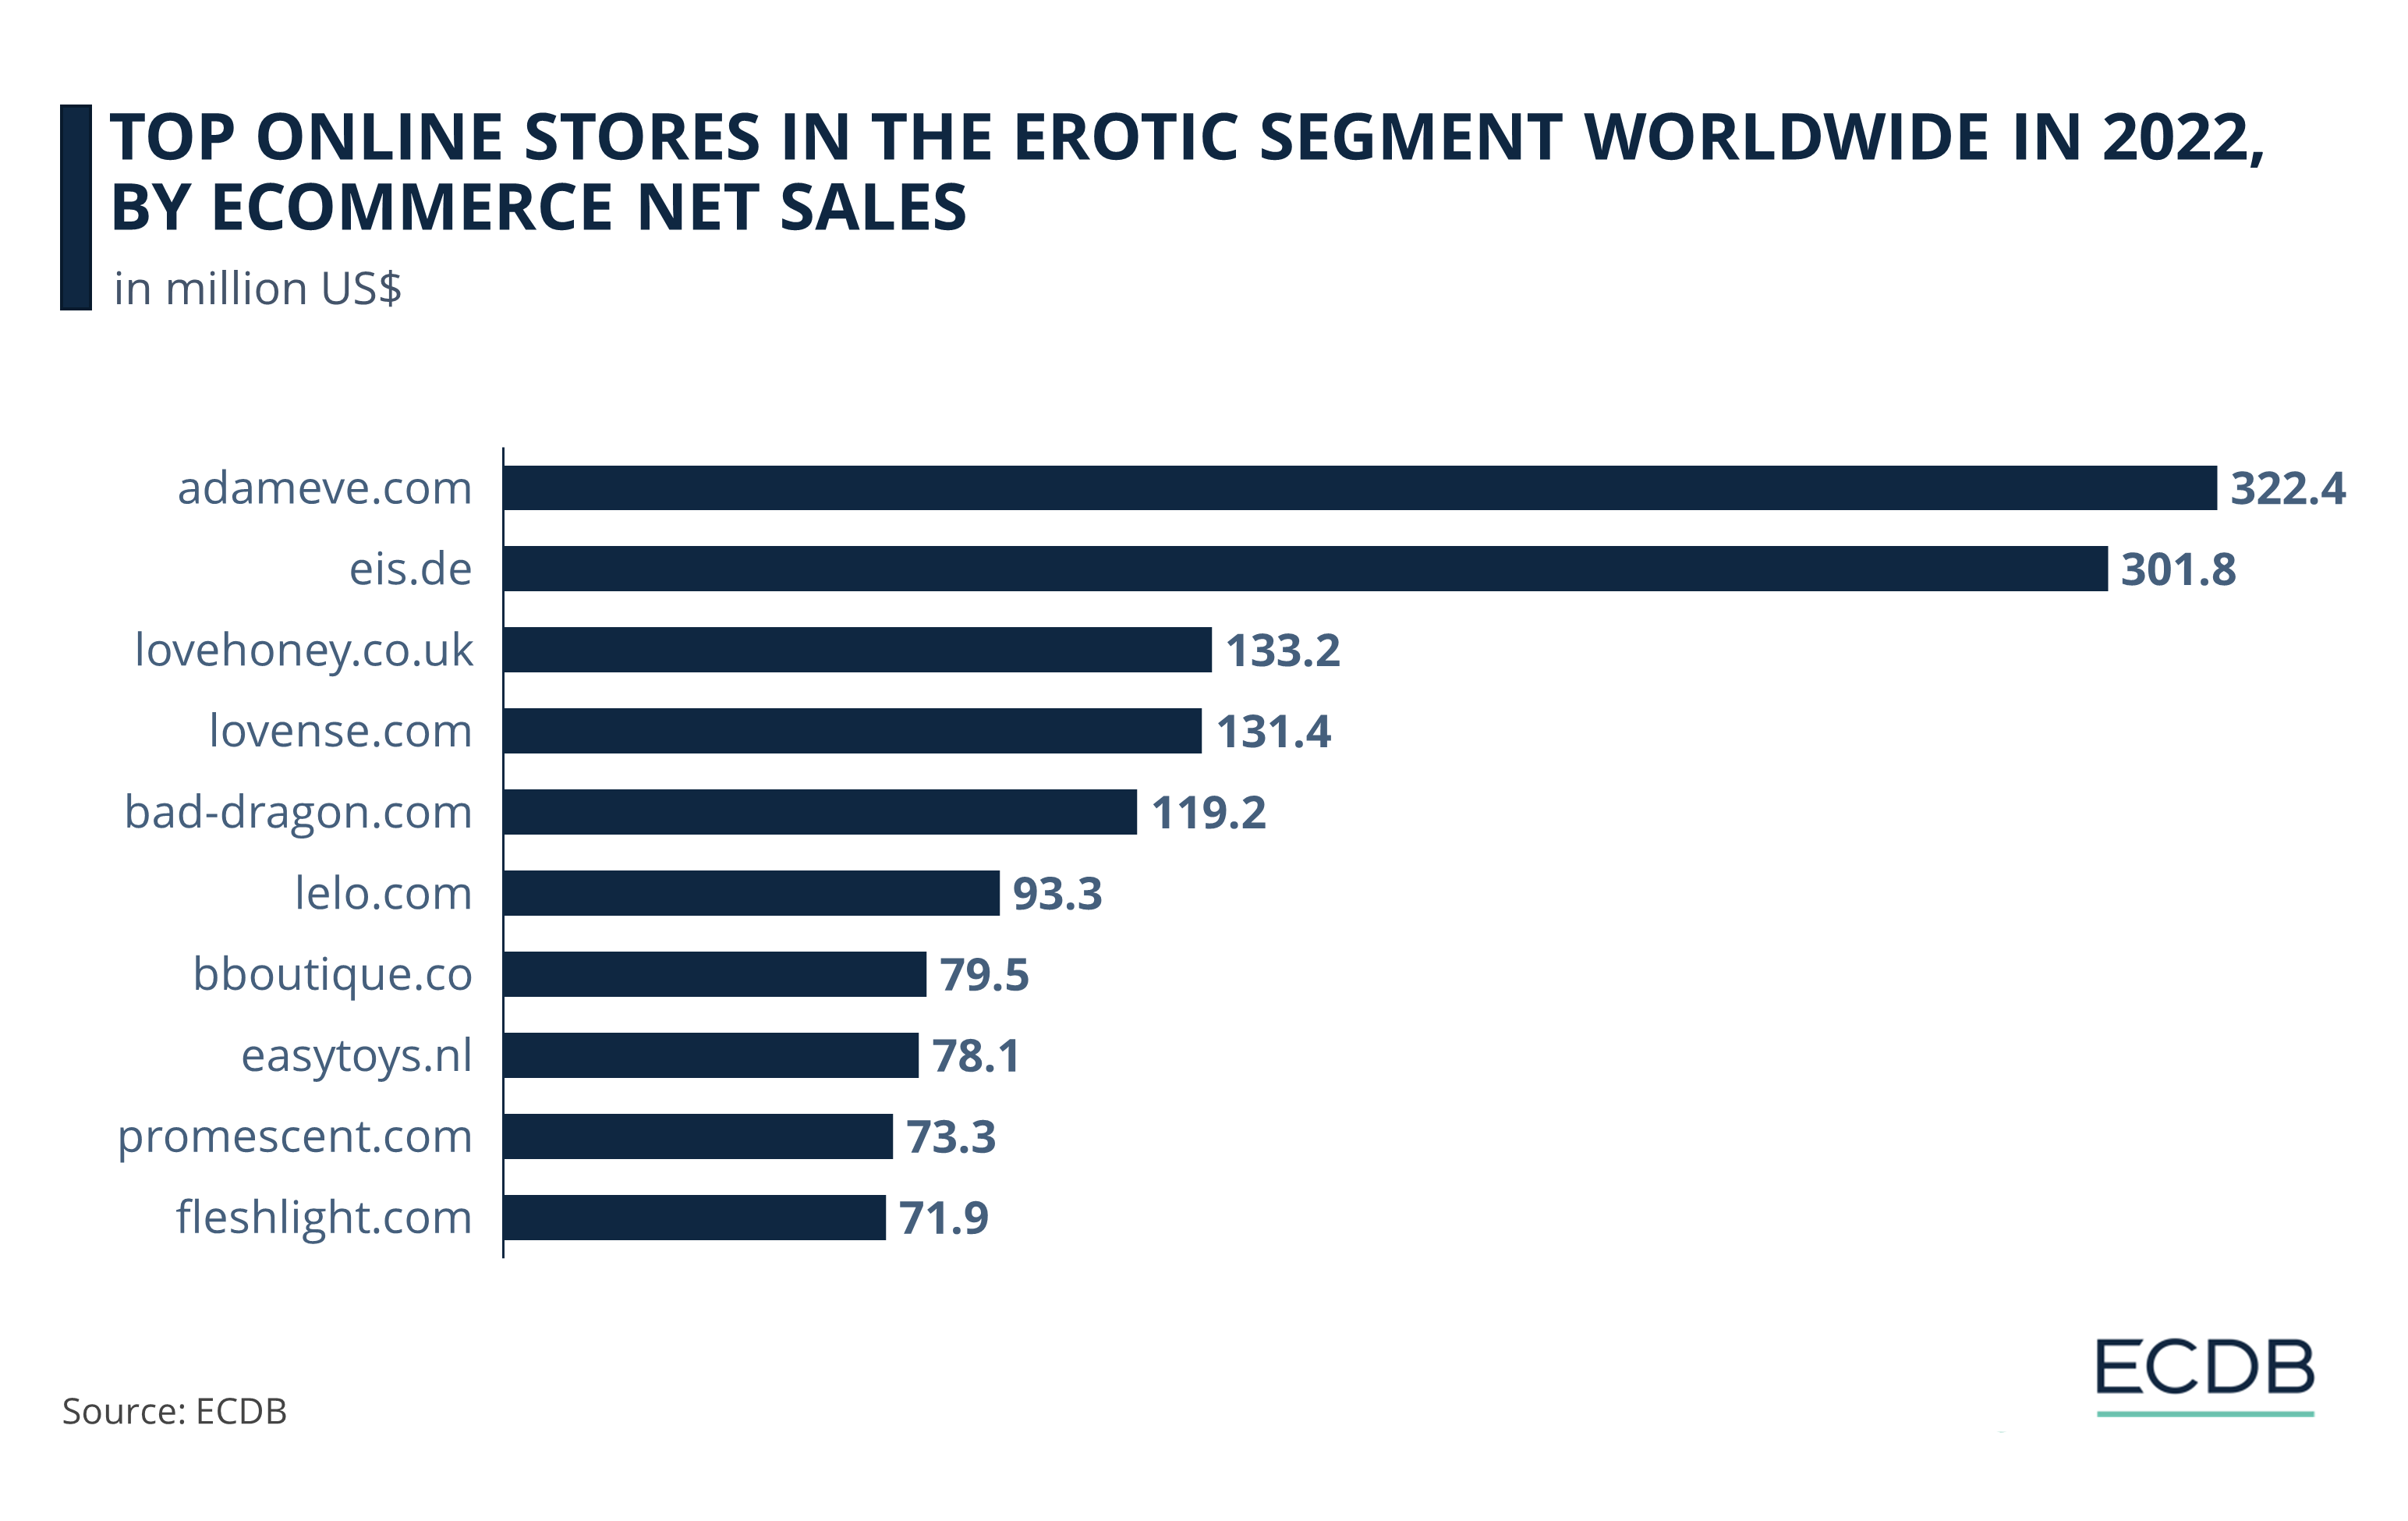 Top Online Stores in the Erotic Segment Worldwide in 2022, by eCommerce Net Sales